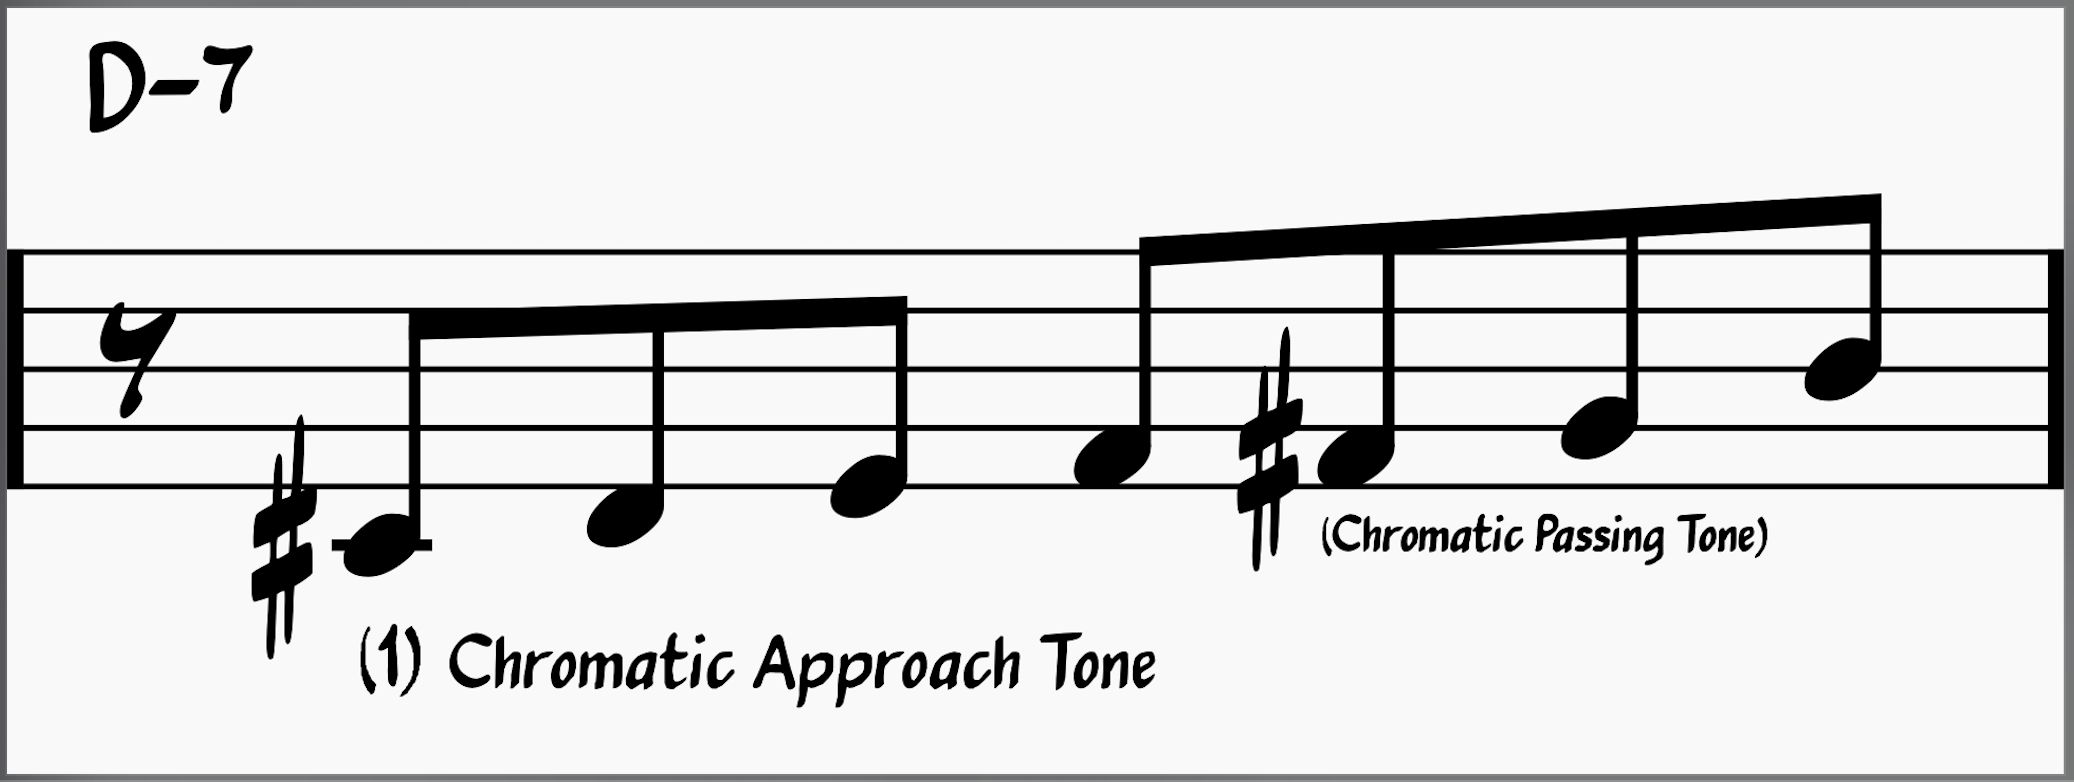 Musical phrasing showing chromatic approach tones